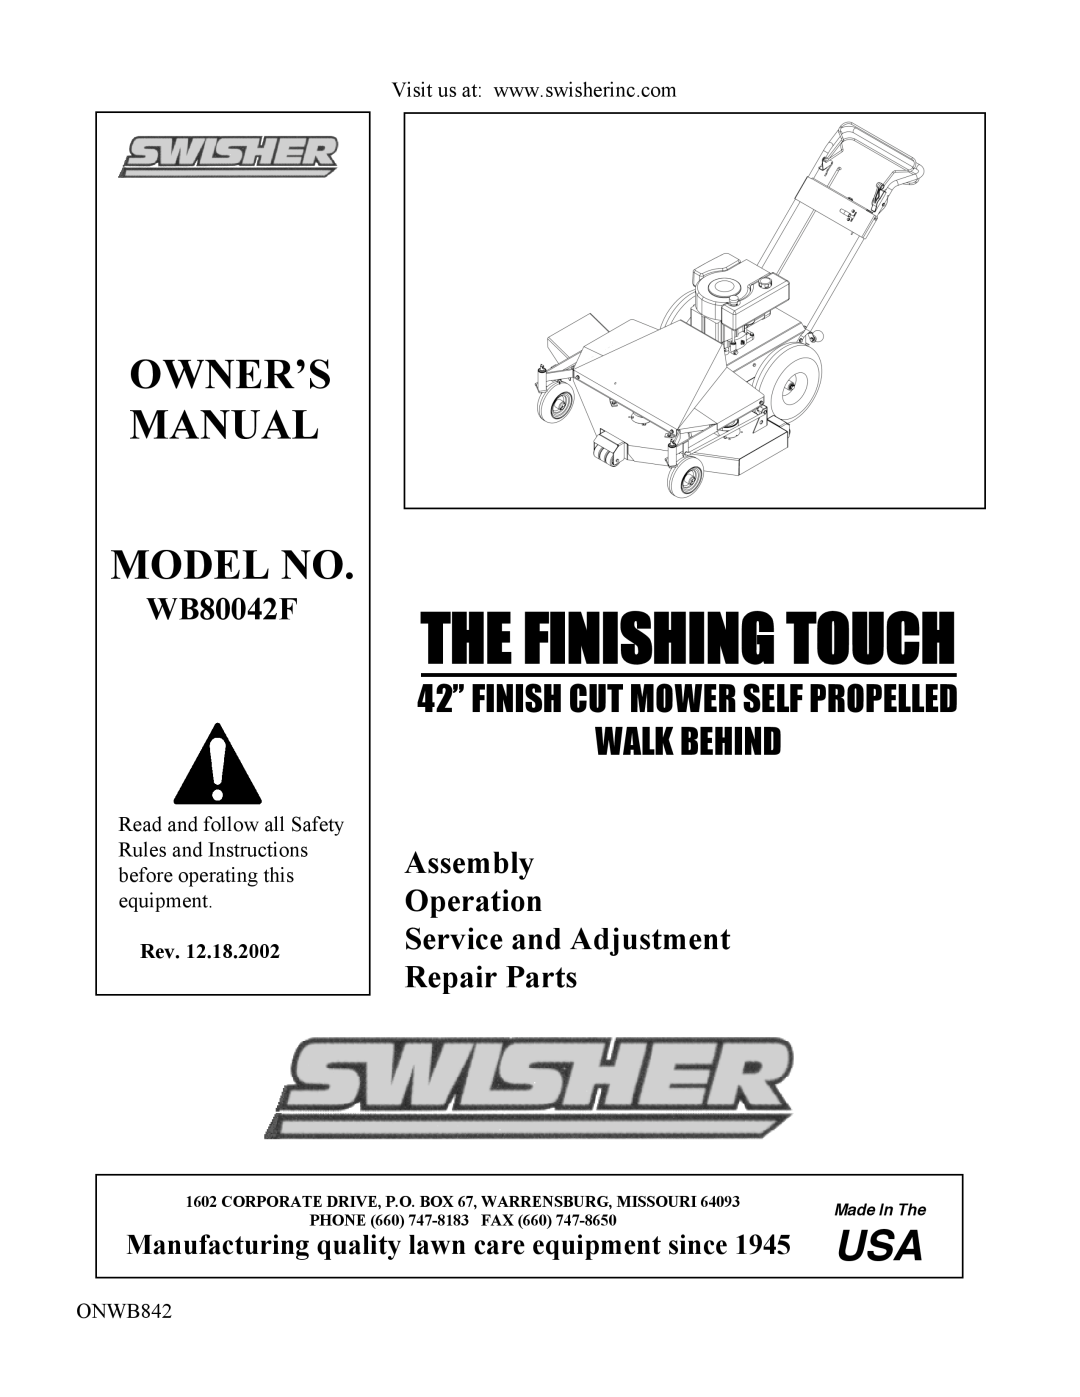 Swisher WB800-42F owner manual WB80042F, Assembly Operation Service and Adjustment, Repair Parts, Rev, ONWB842 